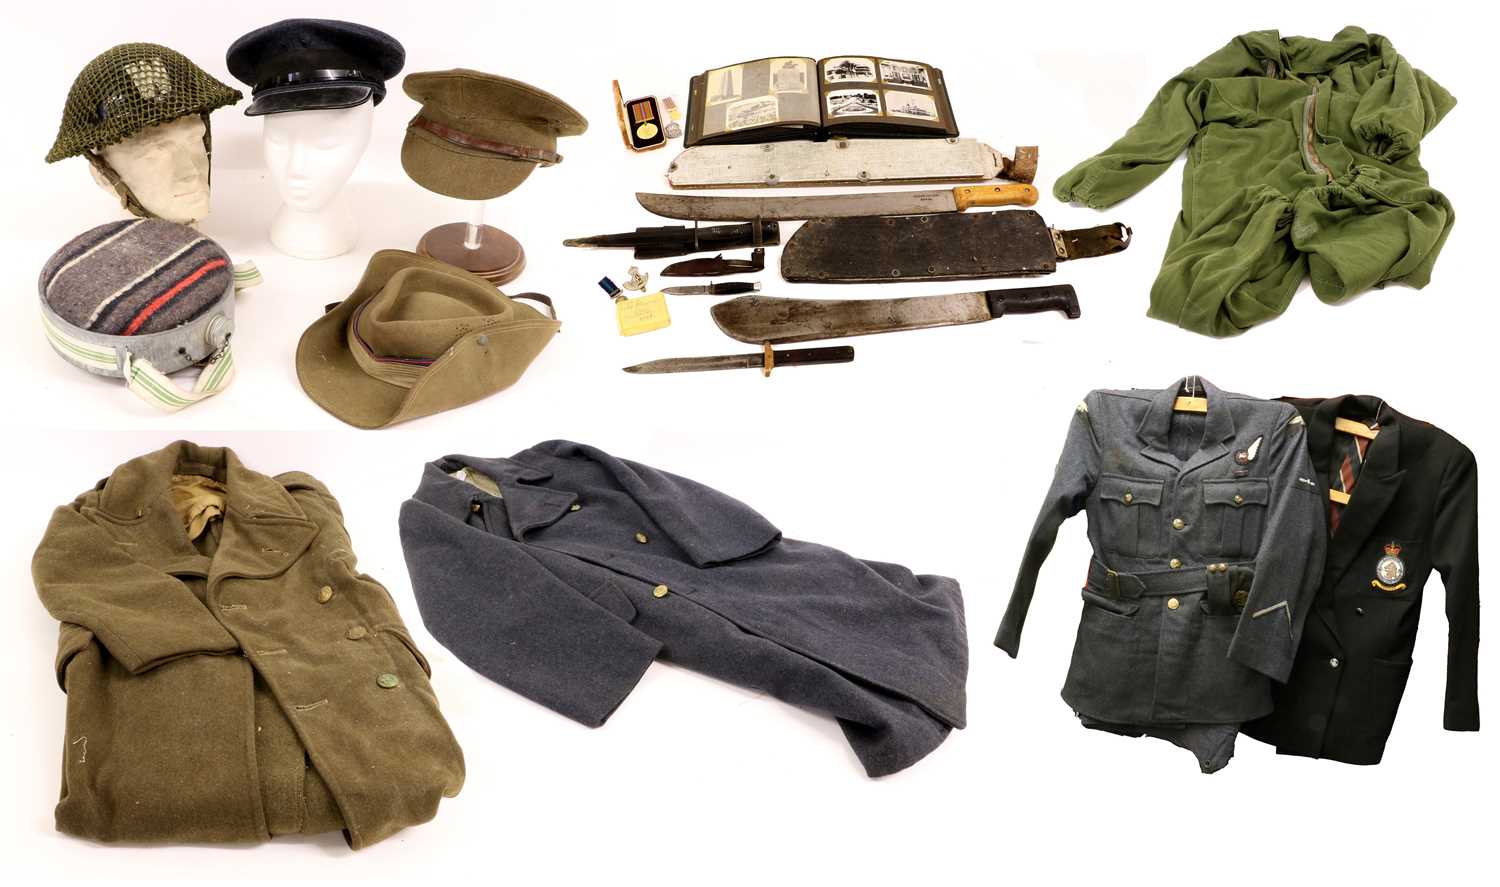 A Small Quantity of Militaria Relating to 4042000 L.A.C. Frederick Hustwitt R.A.F. and Royal Army